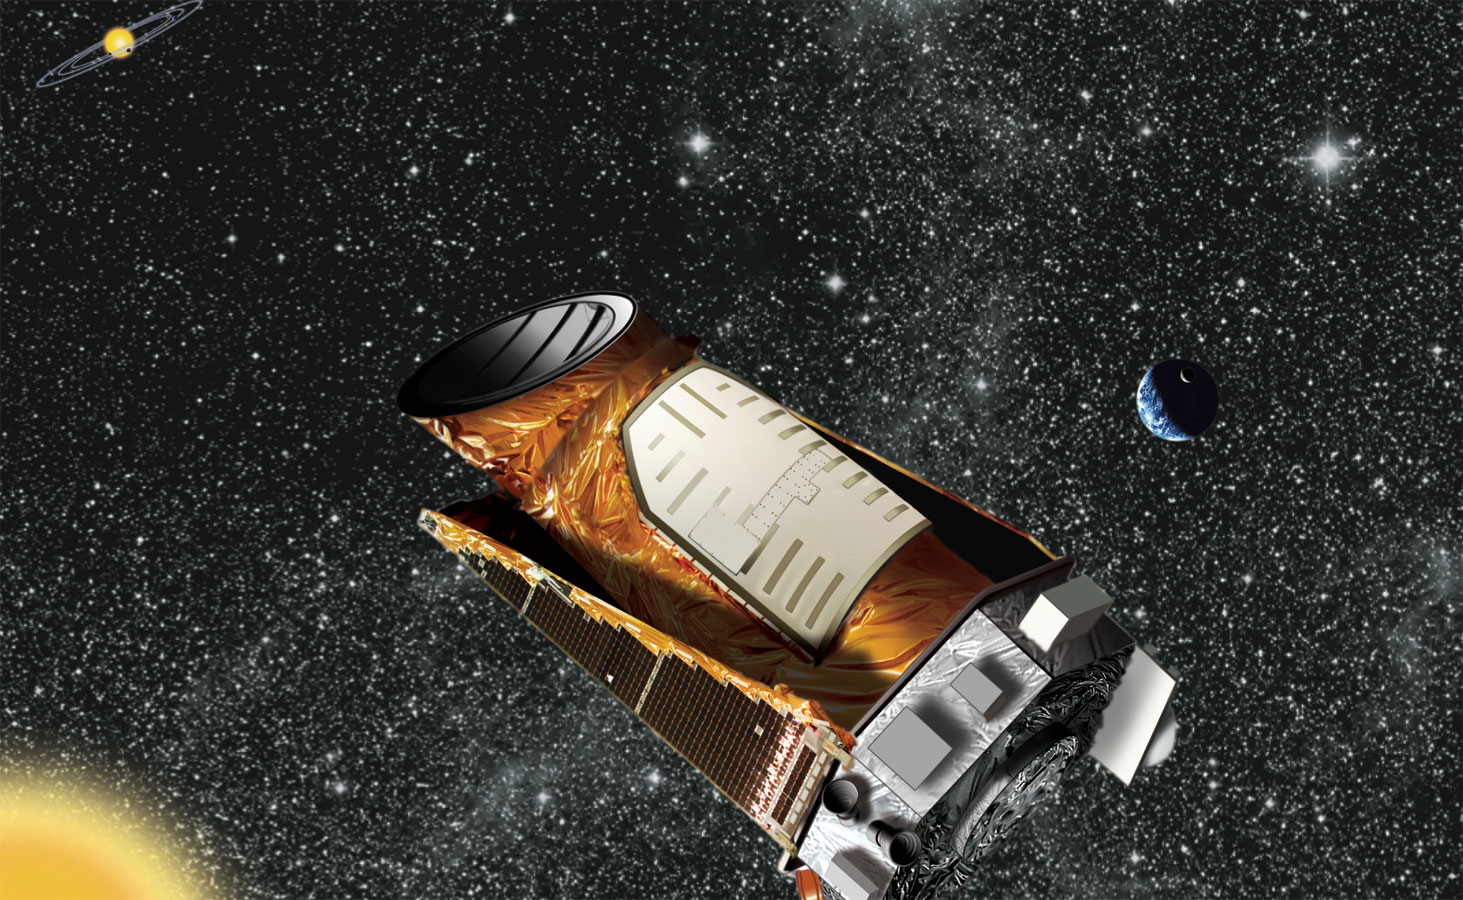 NASA's planet-hunting mission, the Kepler Space Telescope